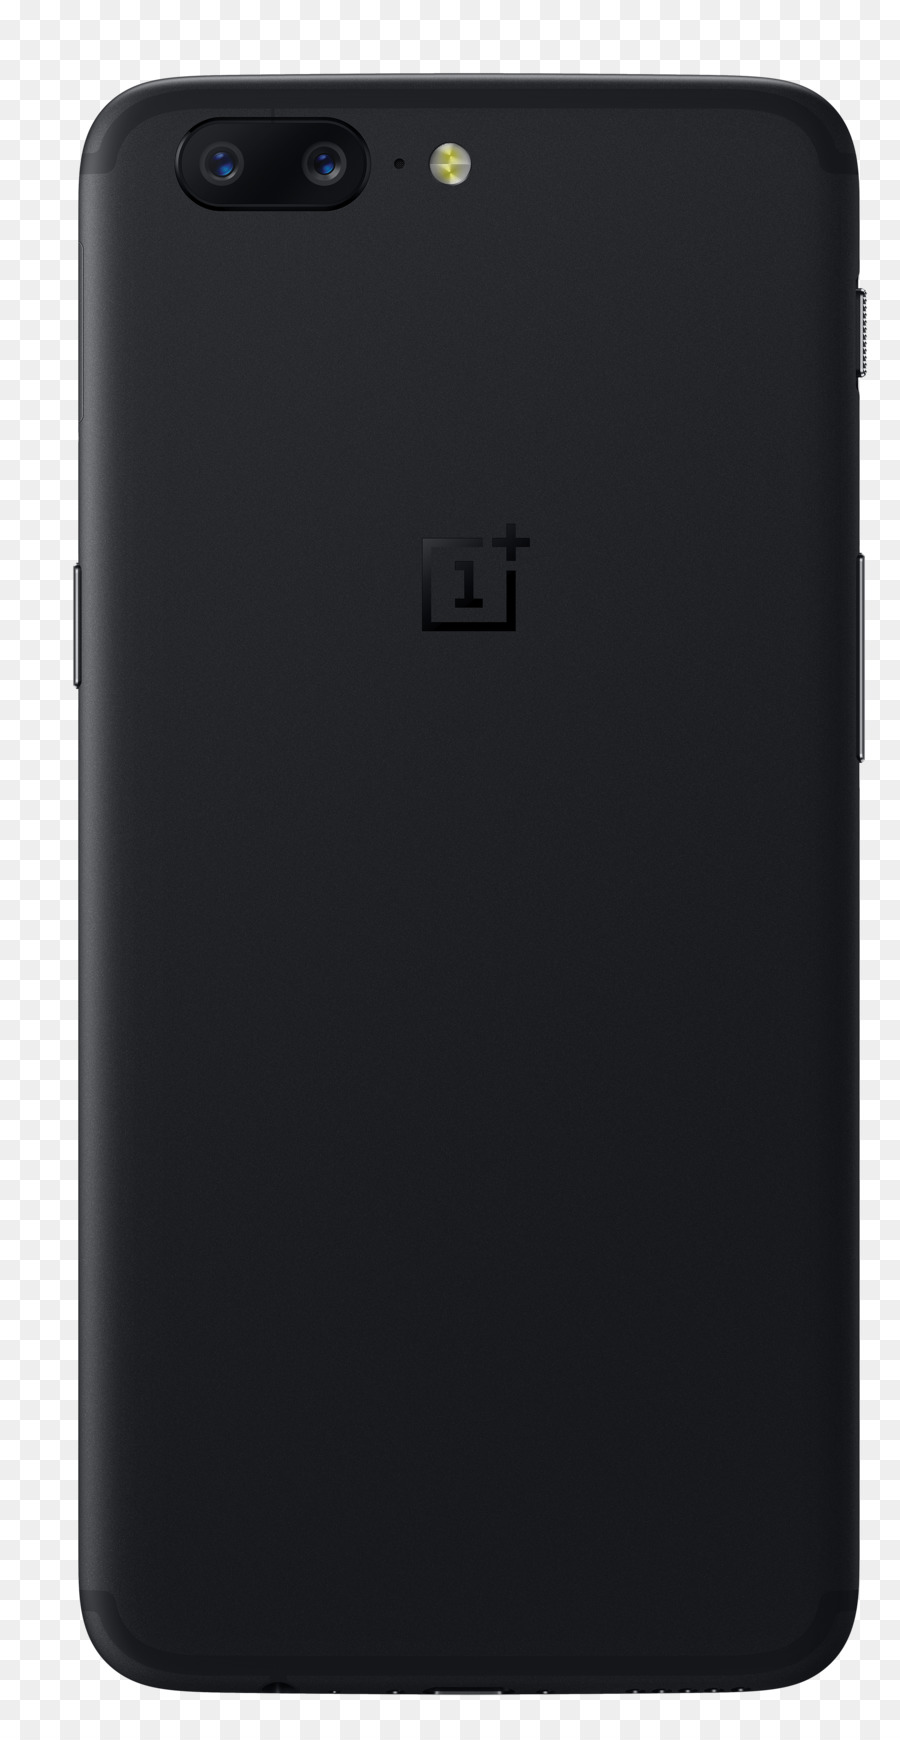 Oneplus 5，Oneplus 3t PNG